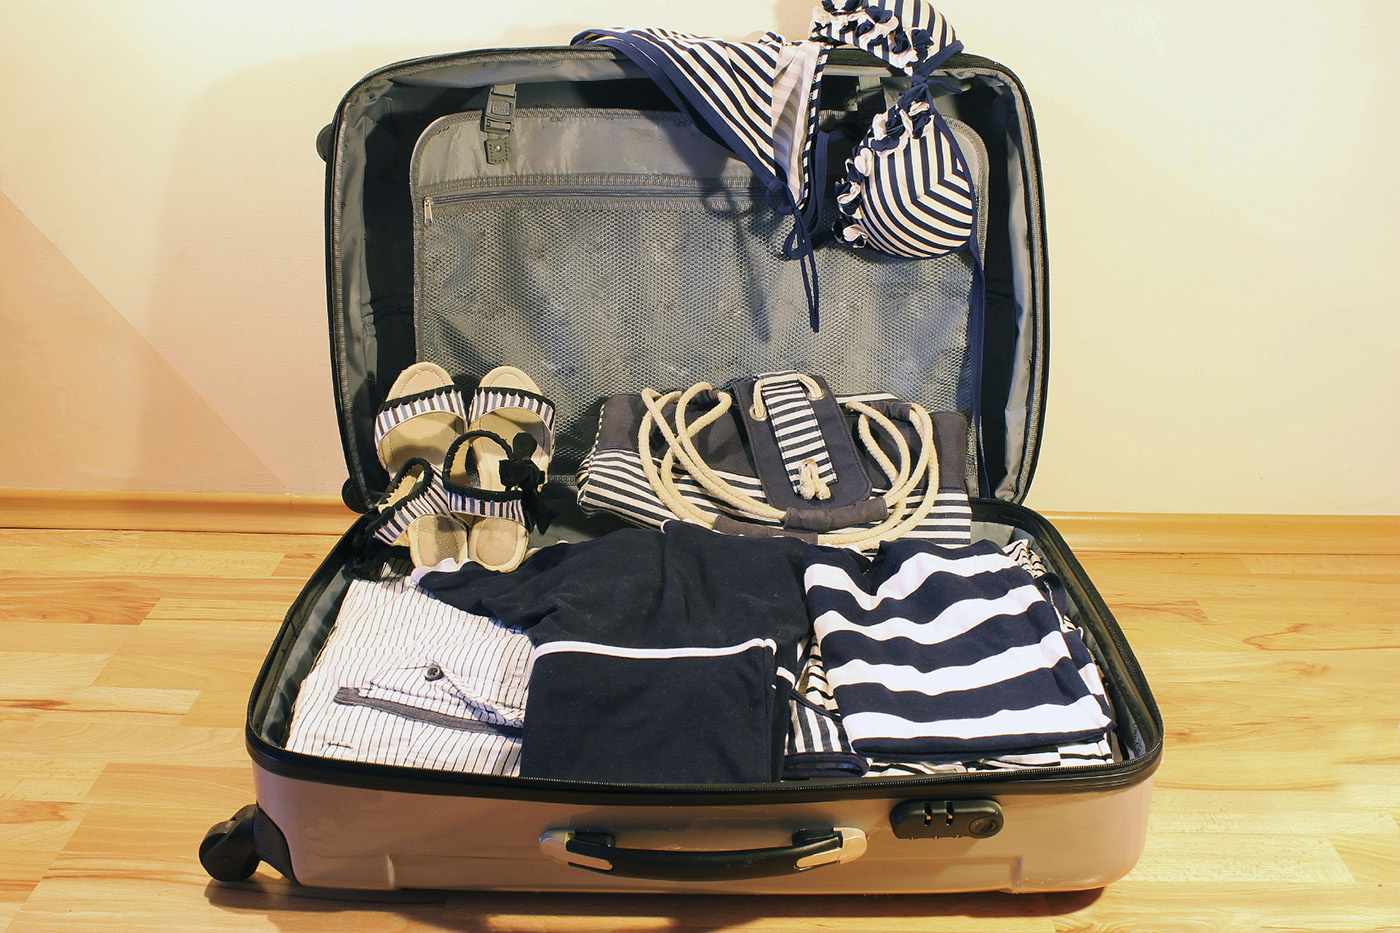 Suitcase with striped clothes and accessories in a marine style